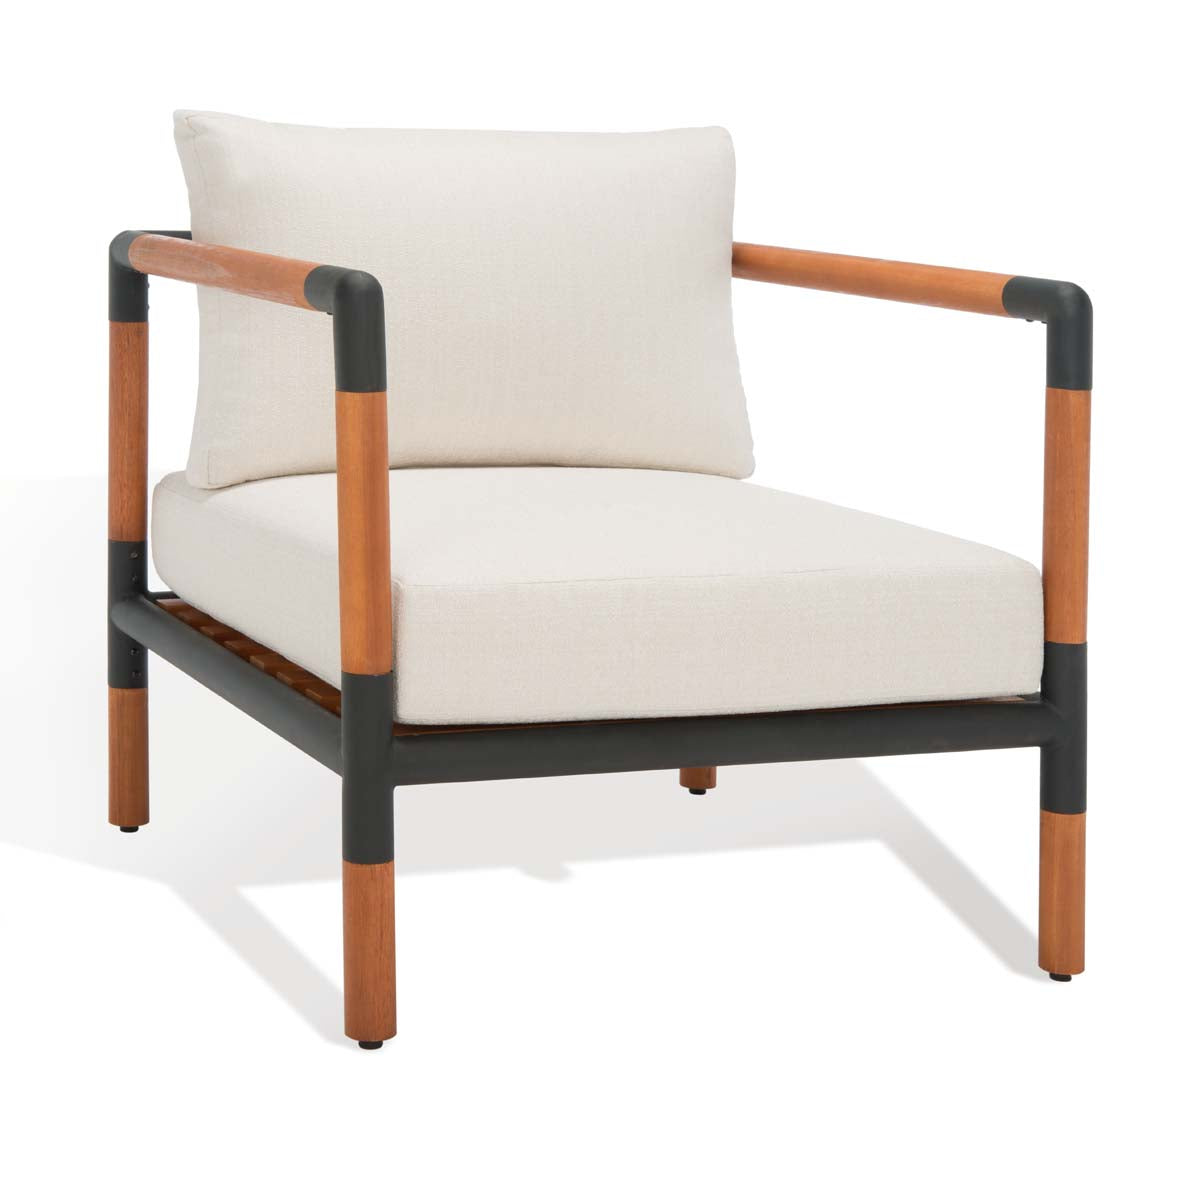 Safavieh Couture Tommy Metal And Wood Patio Chair